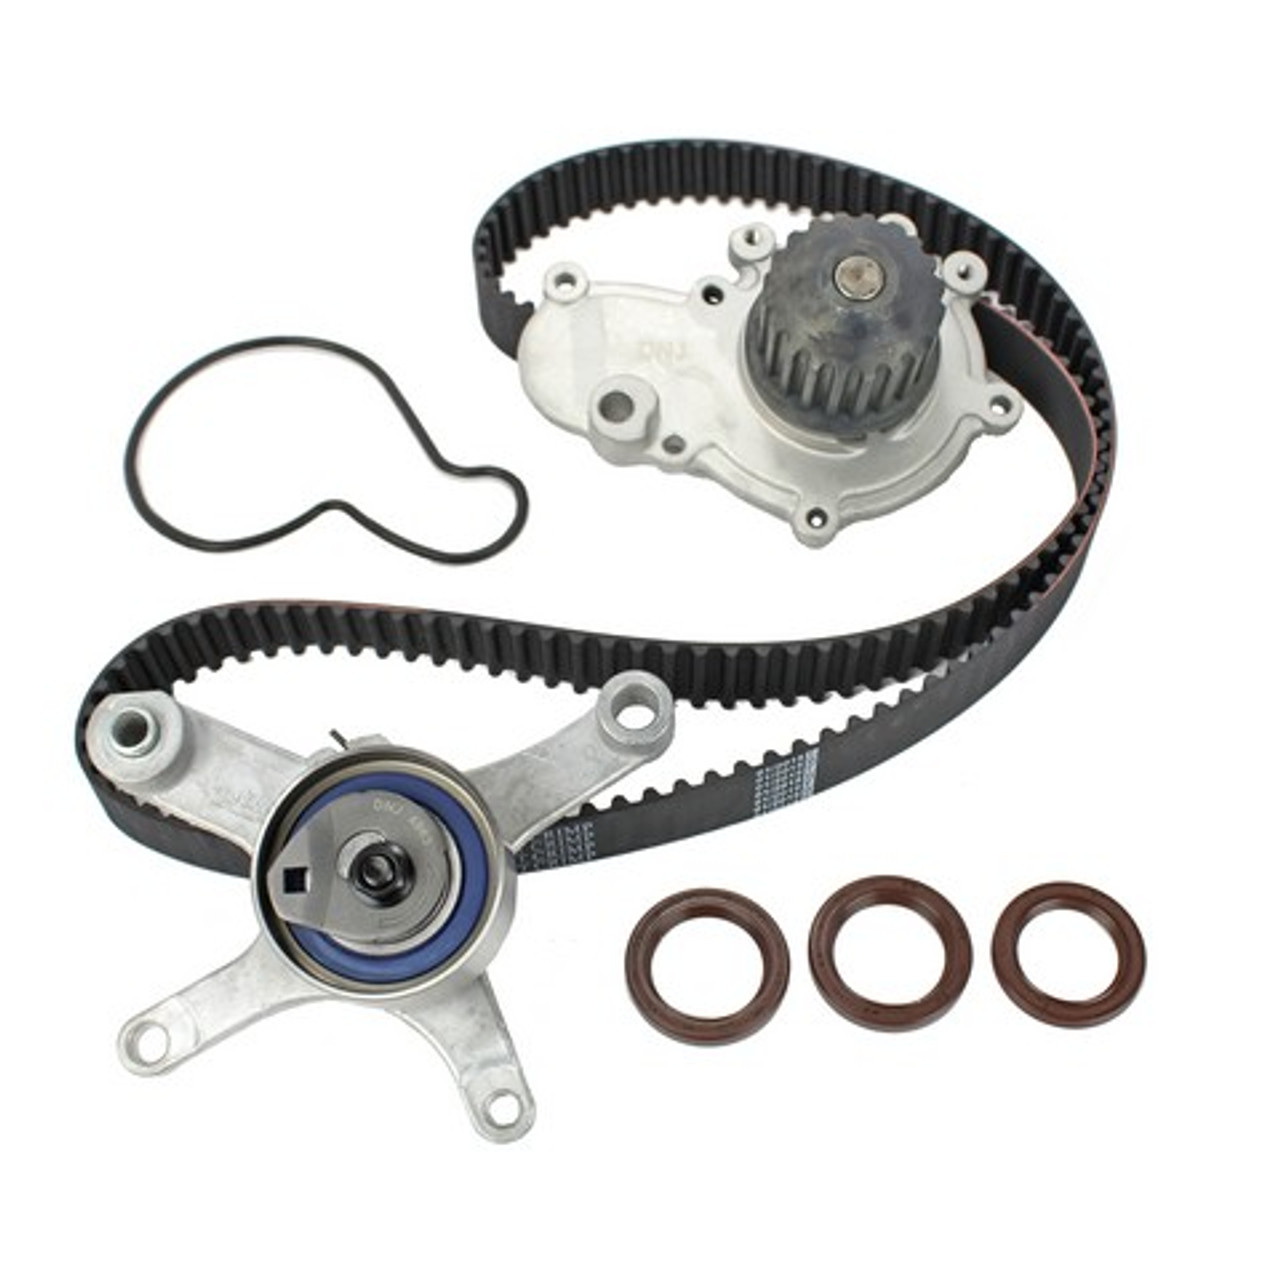 Timing Belt Kit with Water Pump 2.0L 1997 Plymouth Neon - TBK150AWP.27